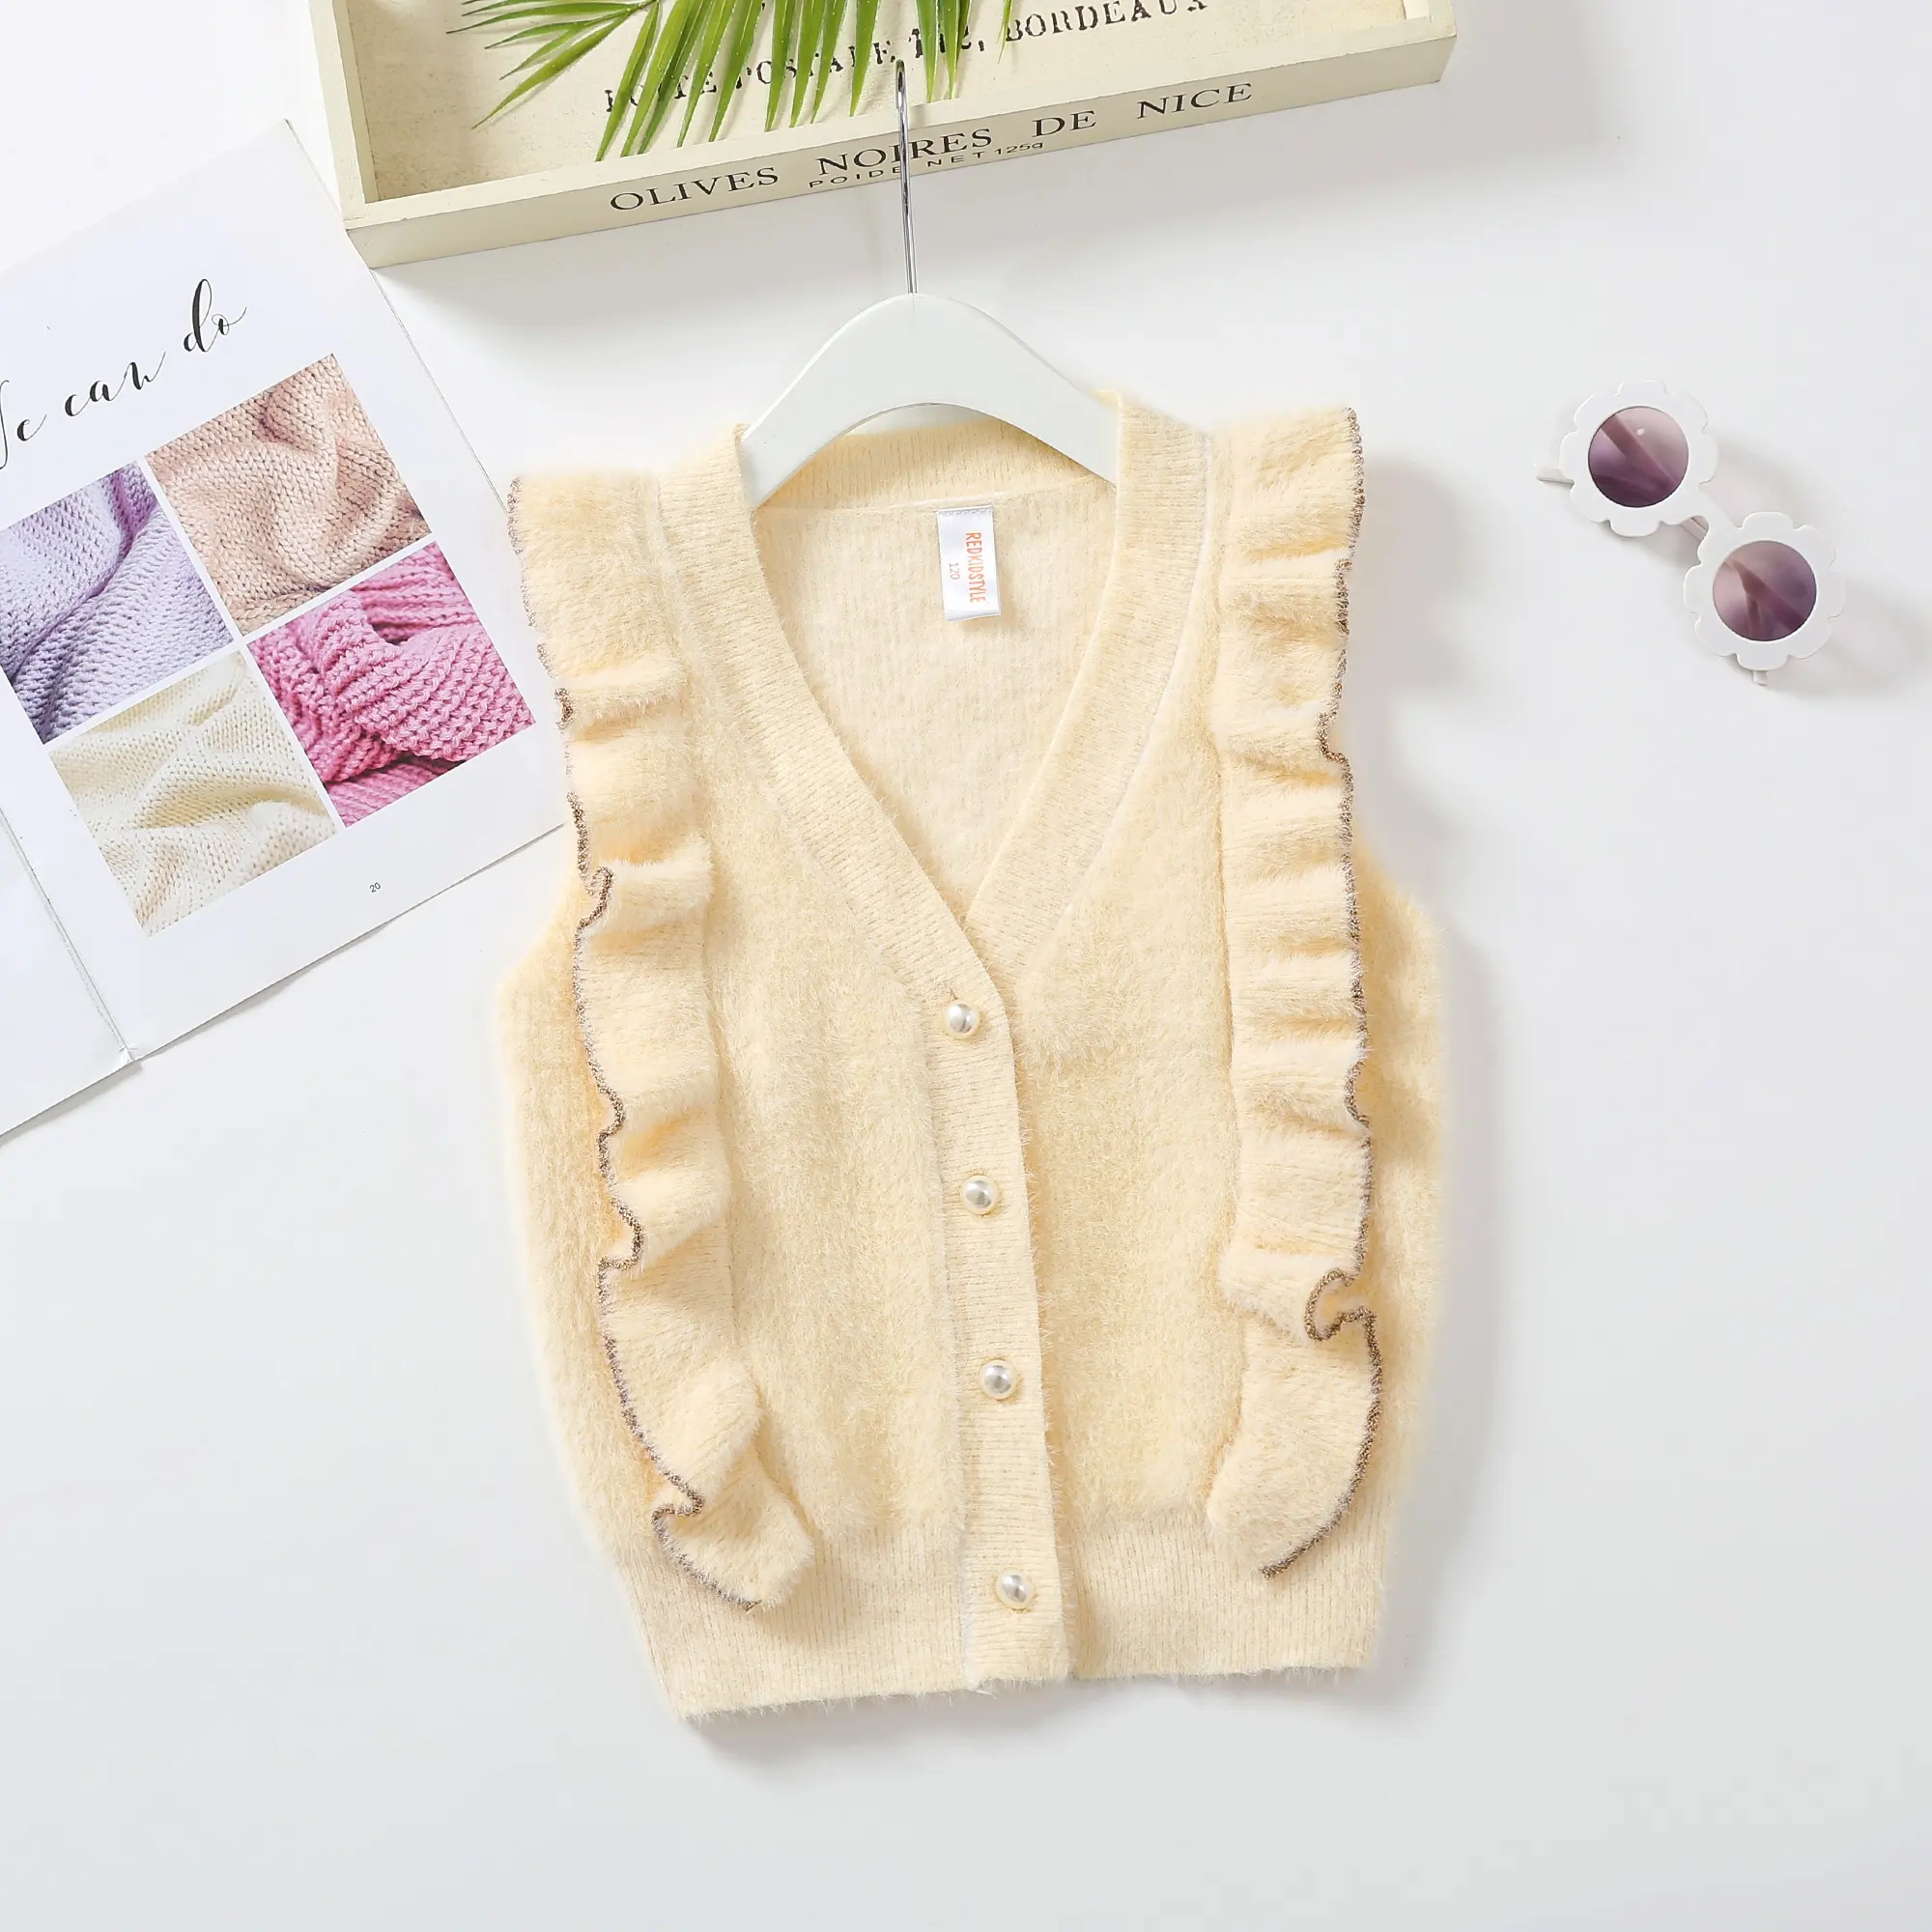 Children's Knitted Sweater Customized Spring and Autumn Wear V-neck Ruffle Edge Girl Knitted Sleeveless Top